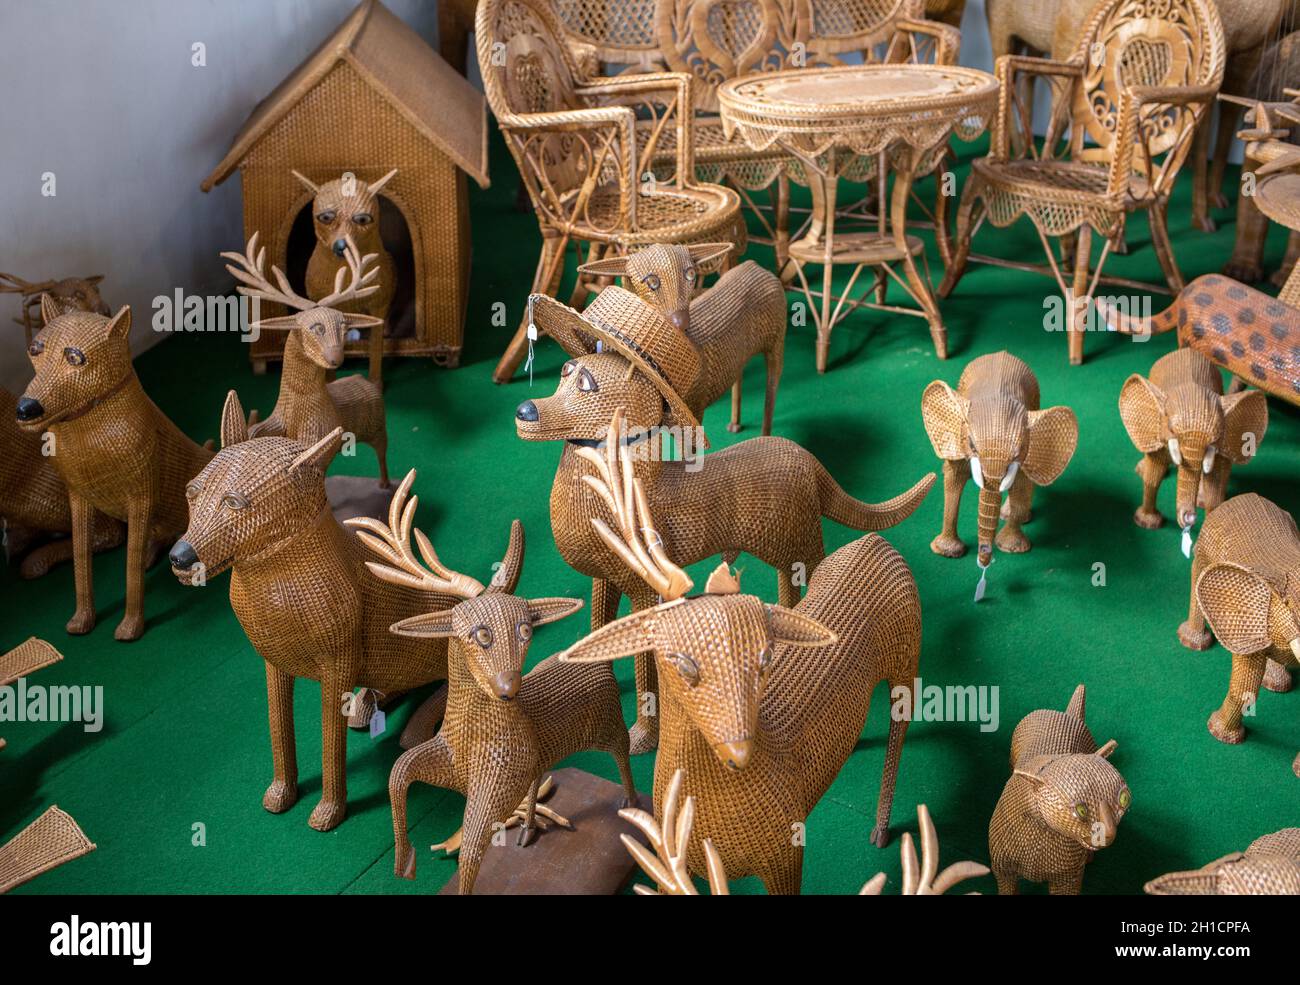 Camacha, Madeira, Portugal - April 19, 2018: Wicker productss on sale in a factory shop in Camacha on Madeira Island. Portugal Stock Photo